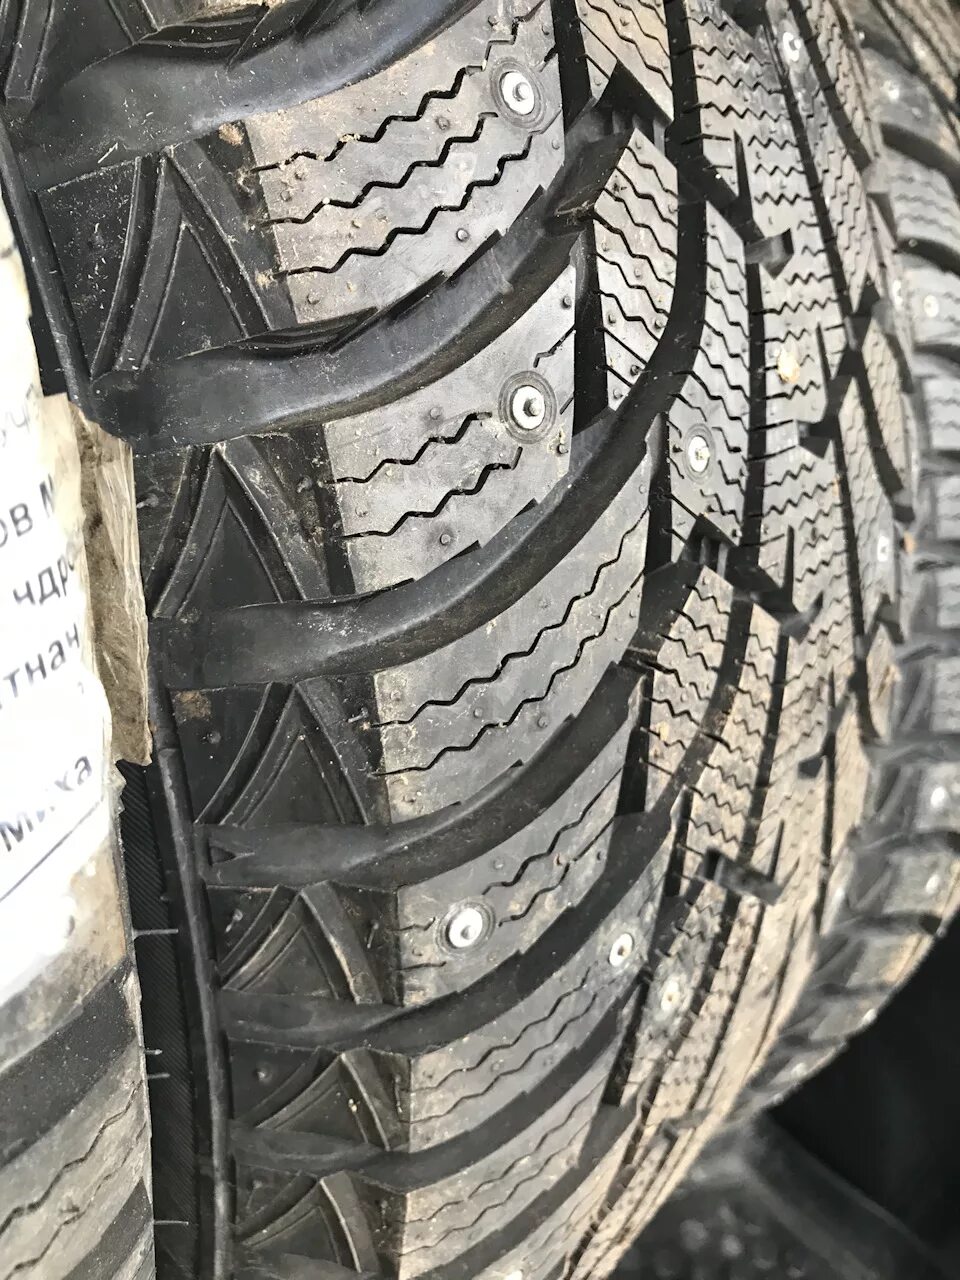 265/65 R17 Maxxis Premitra Ice Nord ns5 116t. Maxxis Premitra Ice Nord ns5. Максис Премитра зима 265 65 17. Maxxis Premitra Ice 5. Максис премитра айс